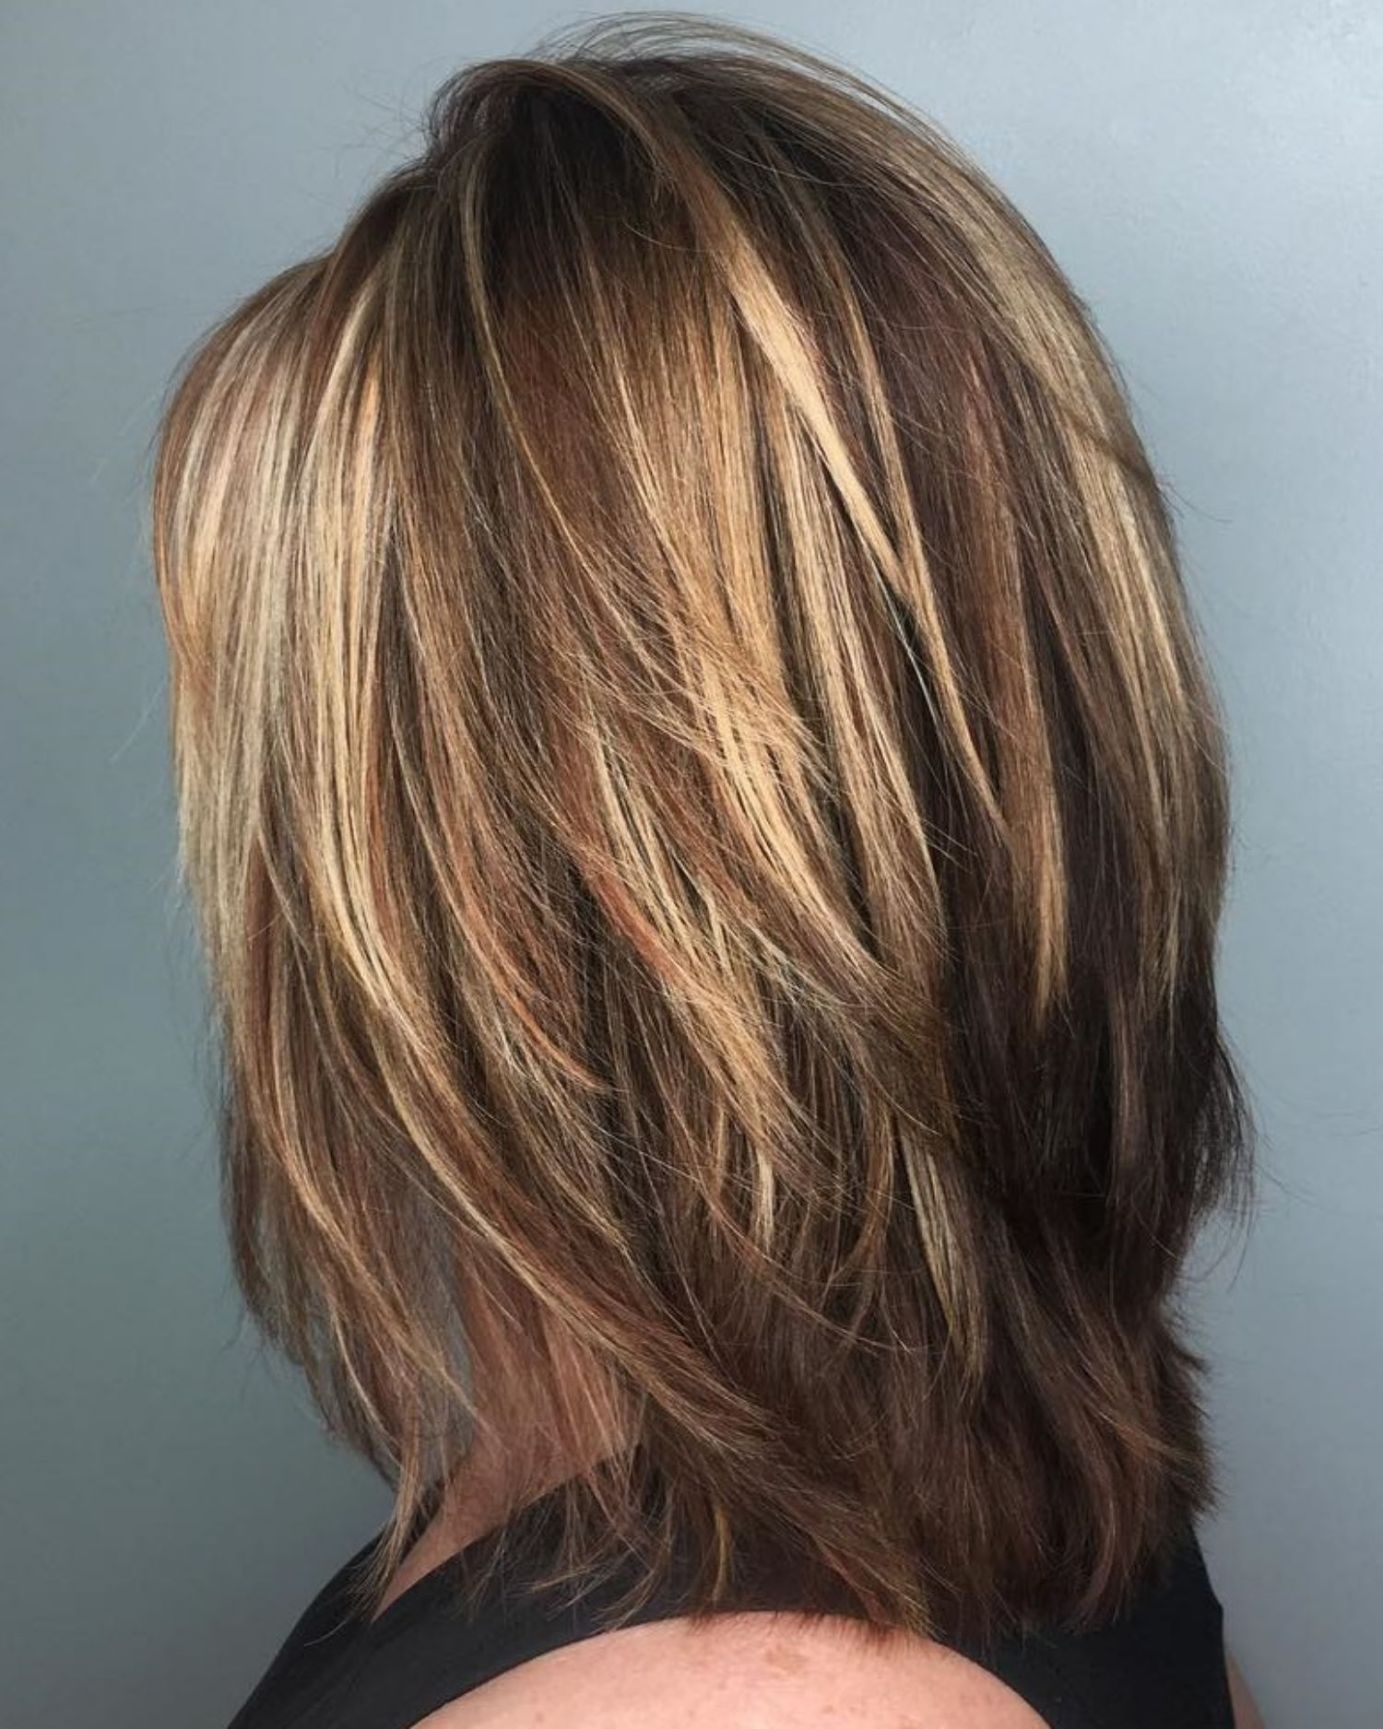 70 Brightest Medium Layered Haircuts To Light You Up | Hair with Shoulder Length Feathered Hair